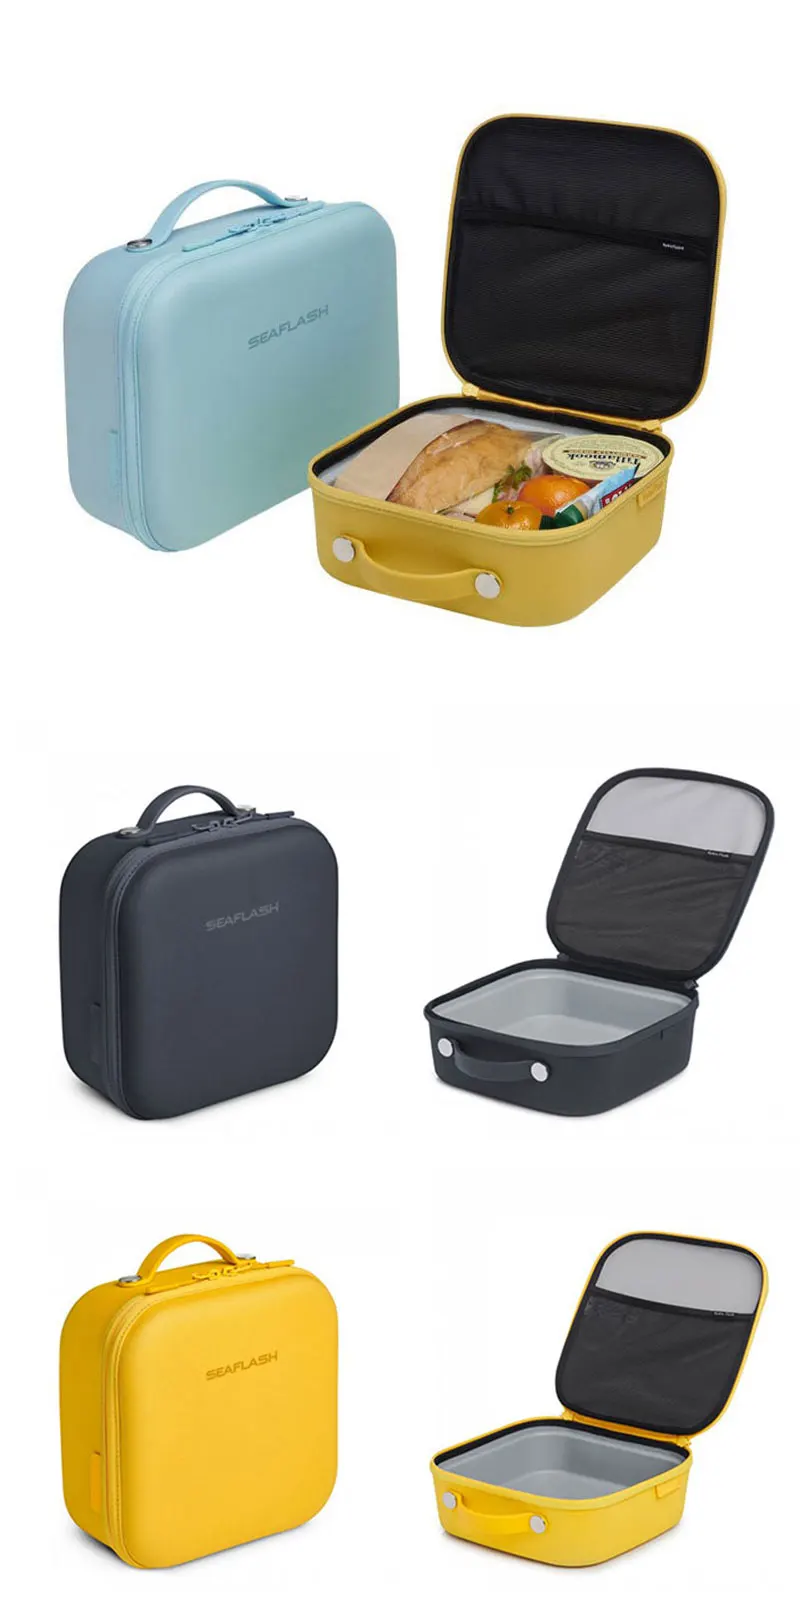 Outdoor Lunch Cooler Bag Insulated Lunch Box Keeps Your Food Cold for Hours Comfortable Carry Small Cooler Bag